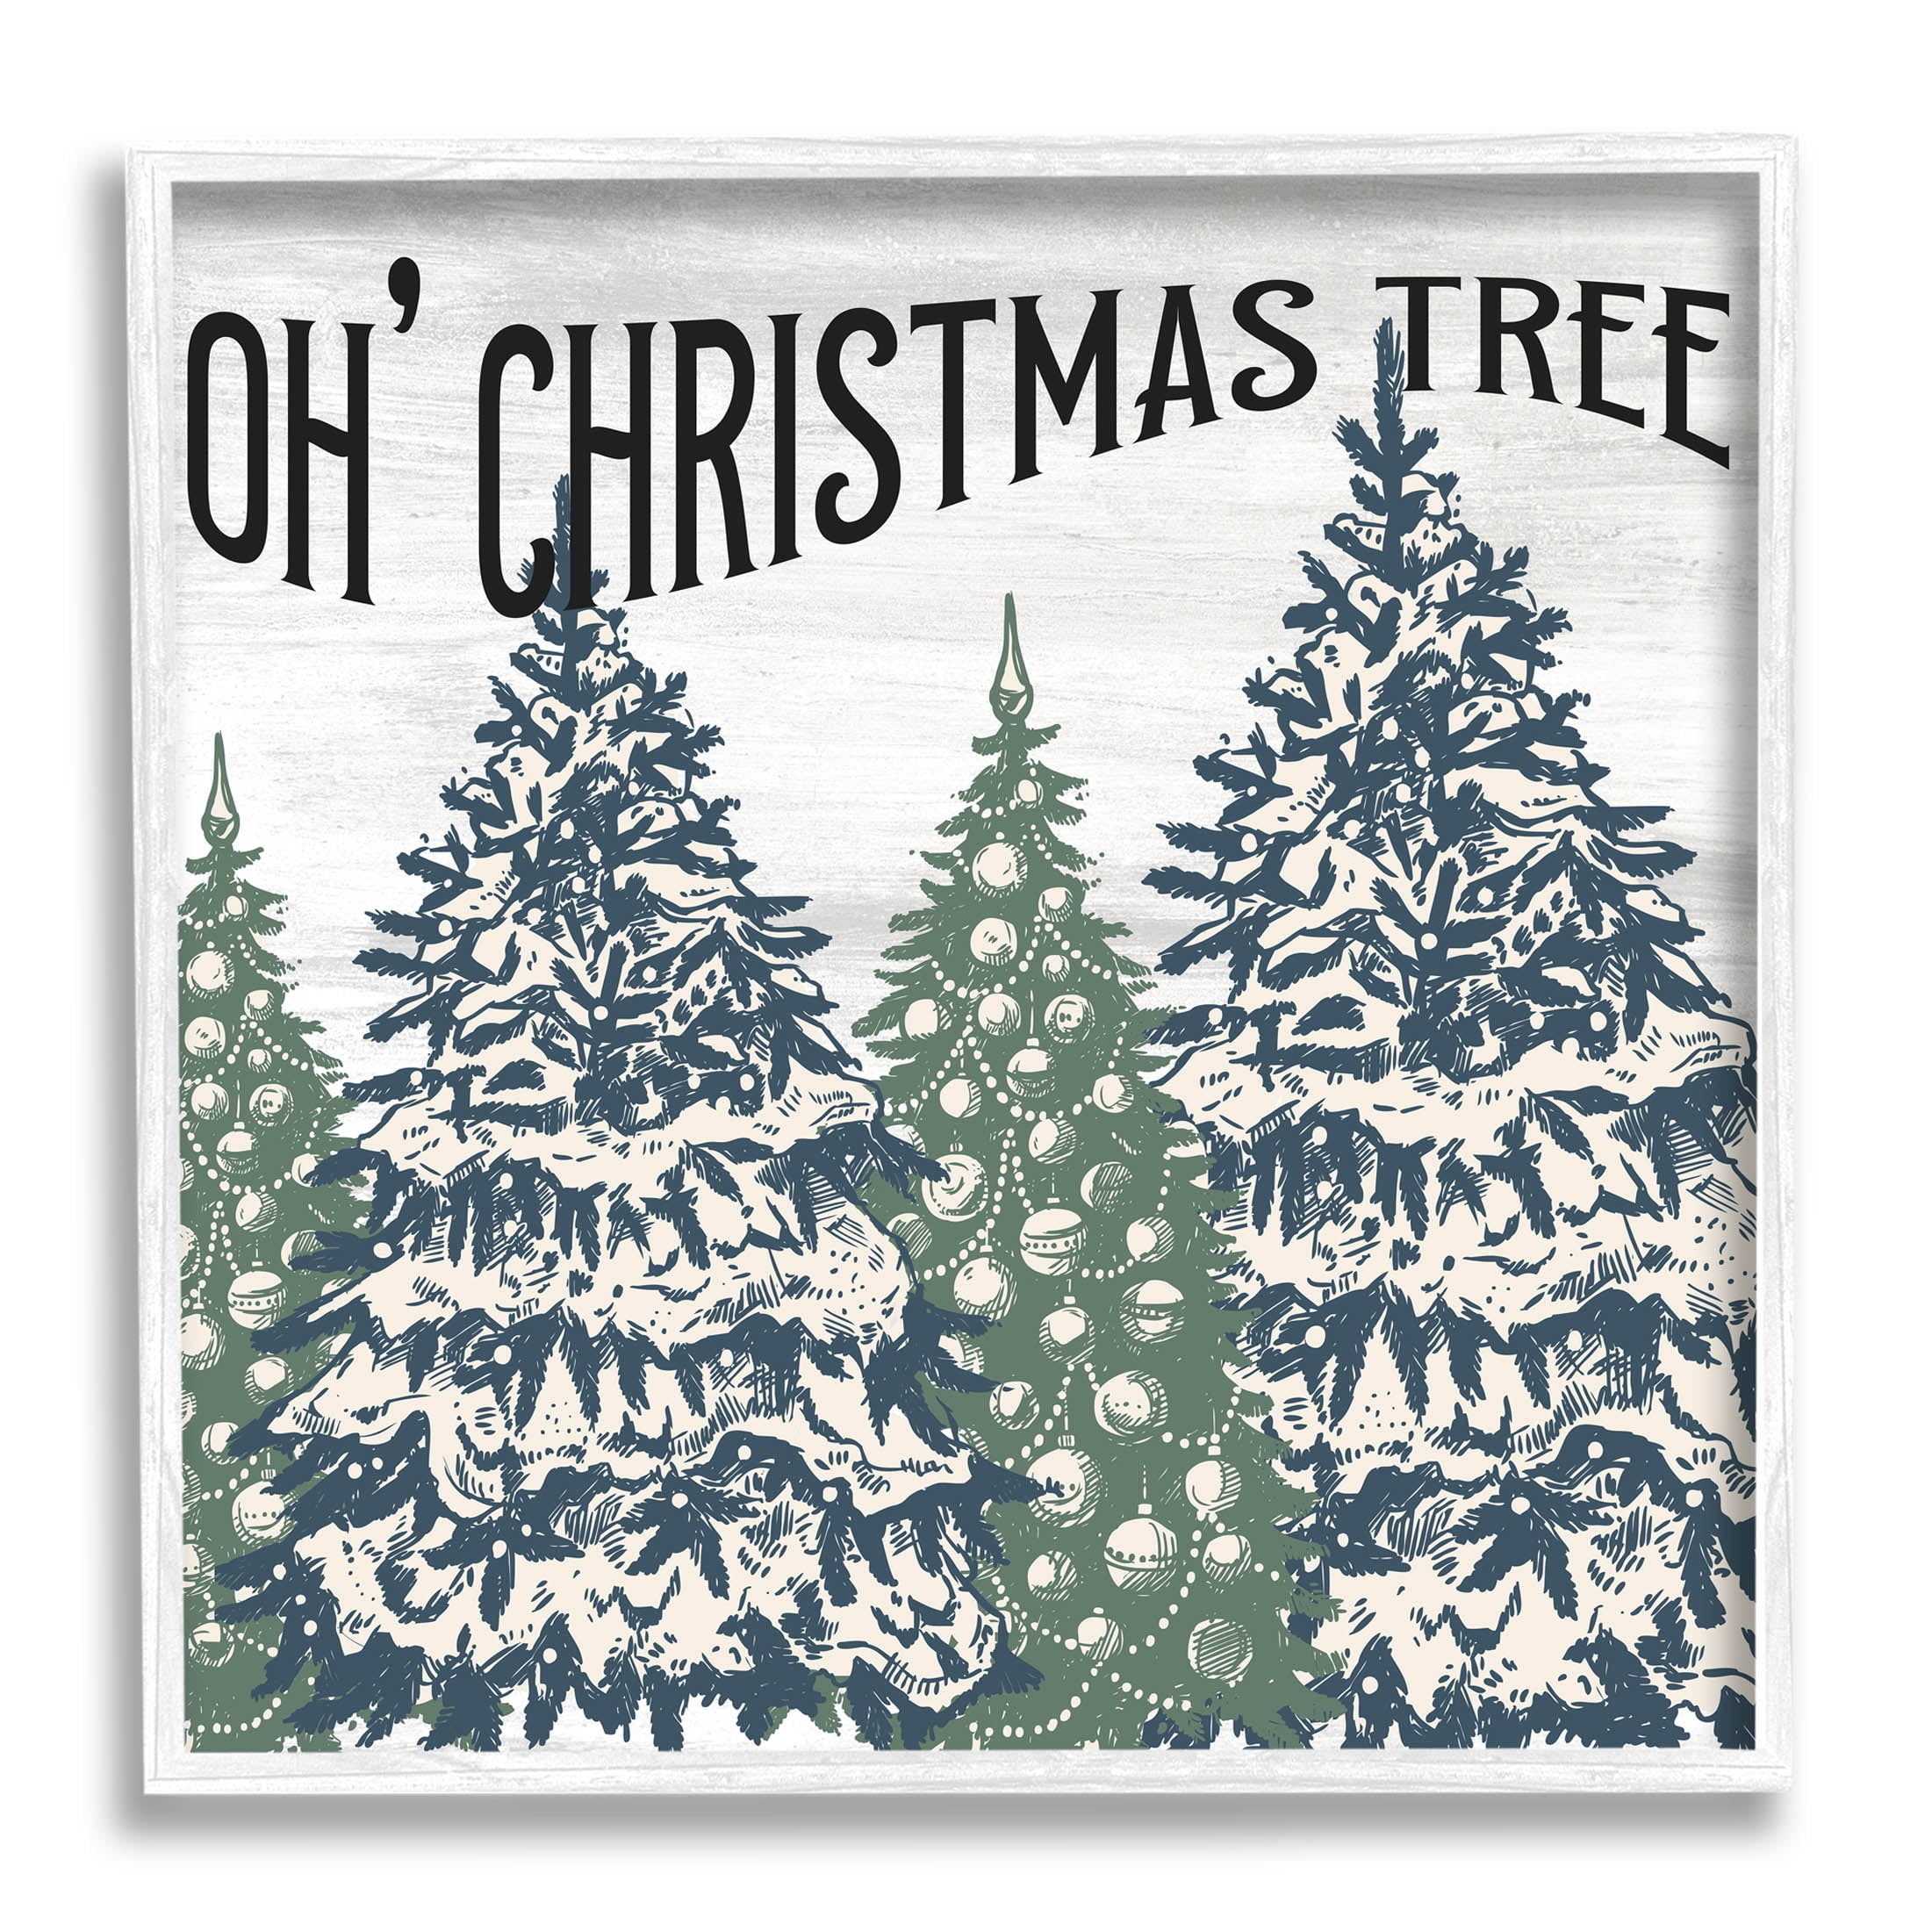 Wise Christmas Mystical Tree Poster for Sale by TheBigSadShop